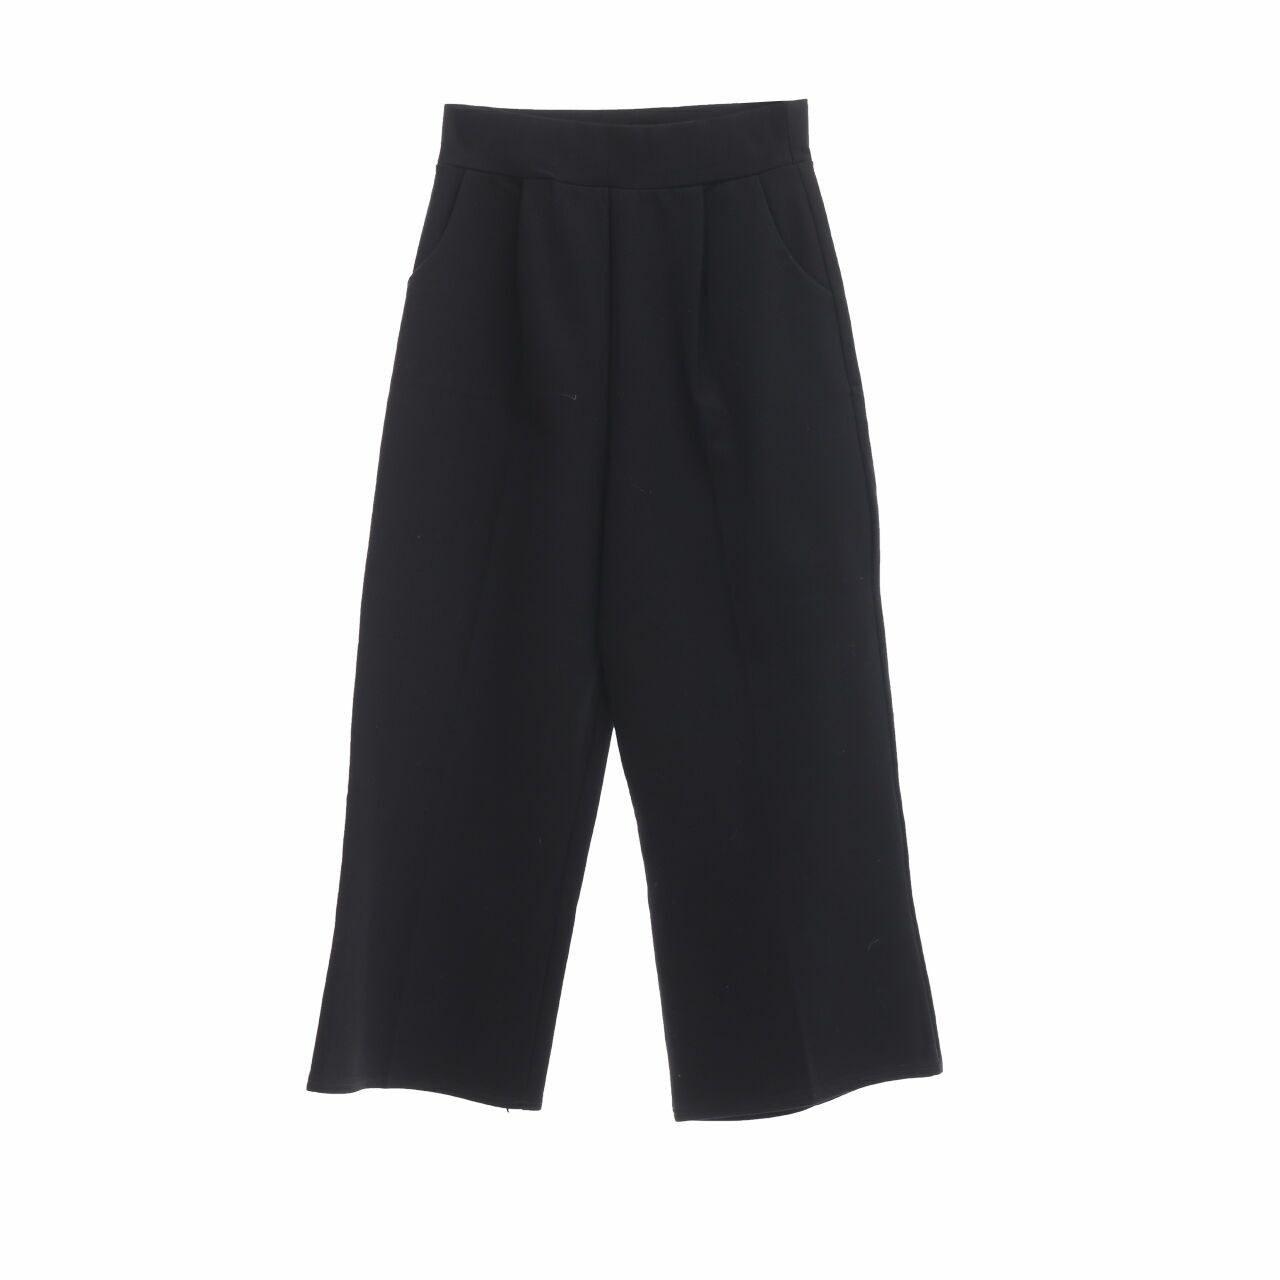 Private Collection Black Culottes Long Pants